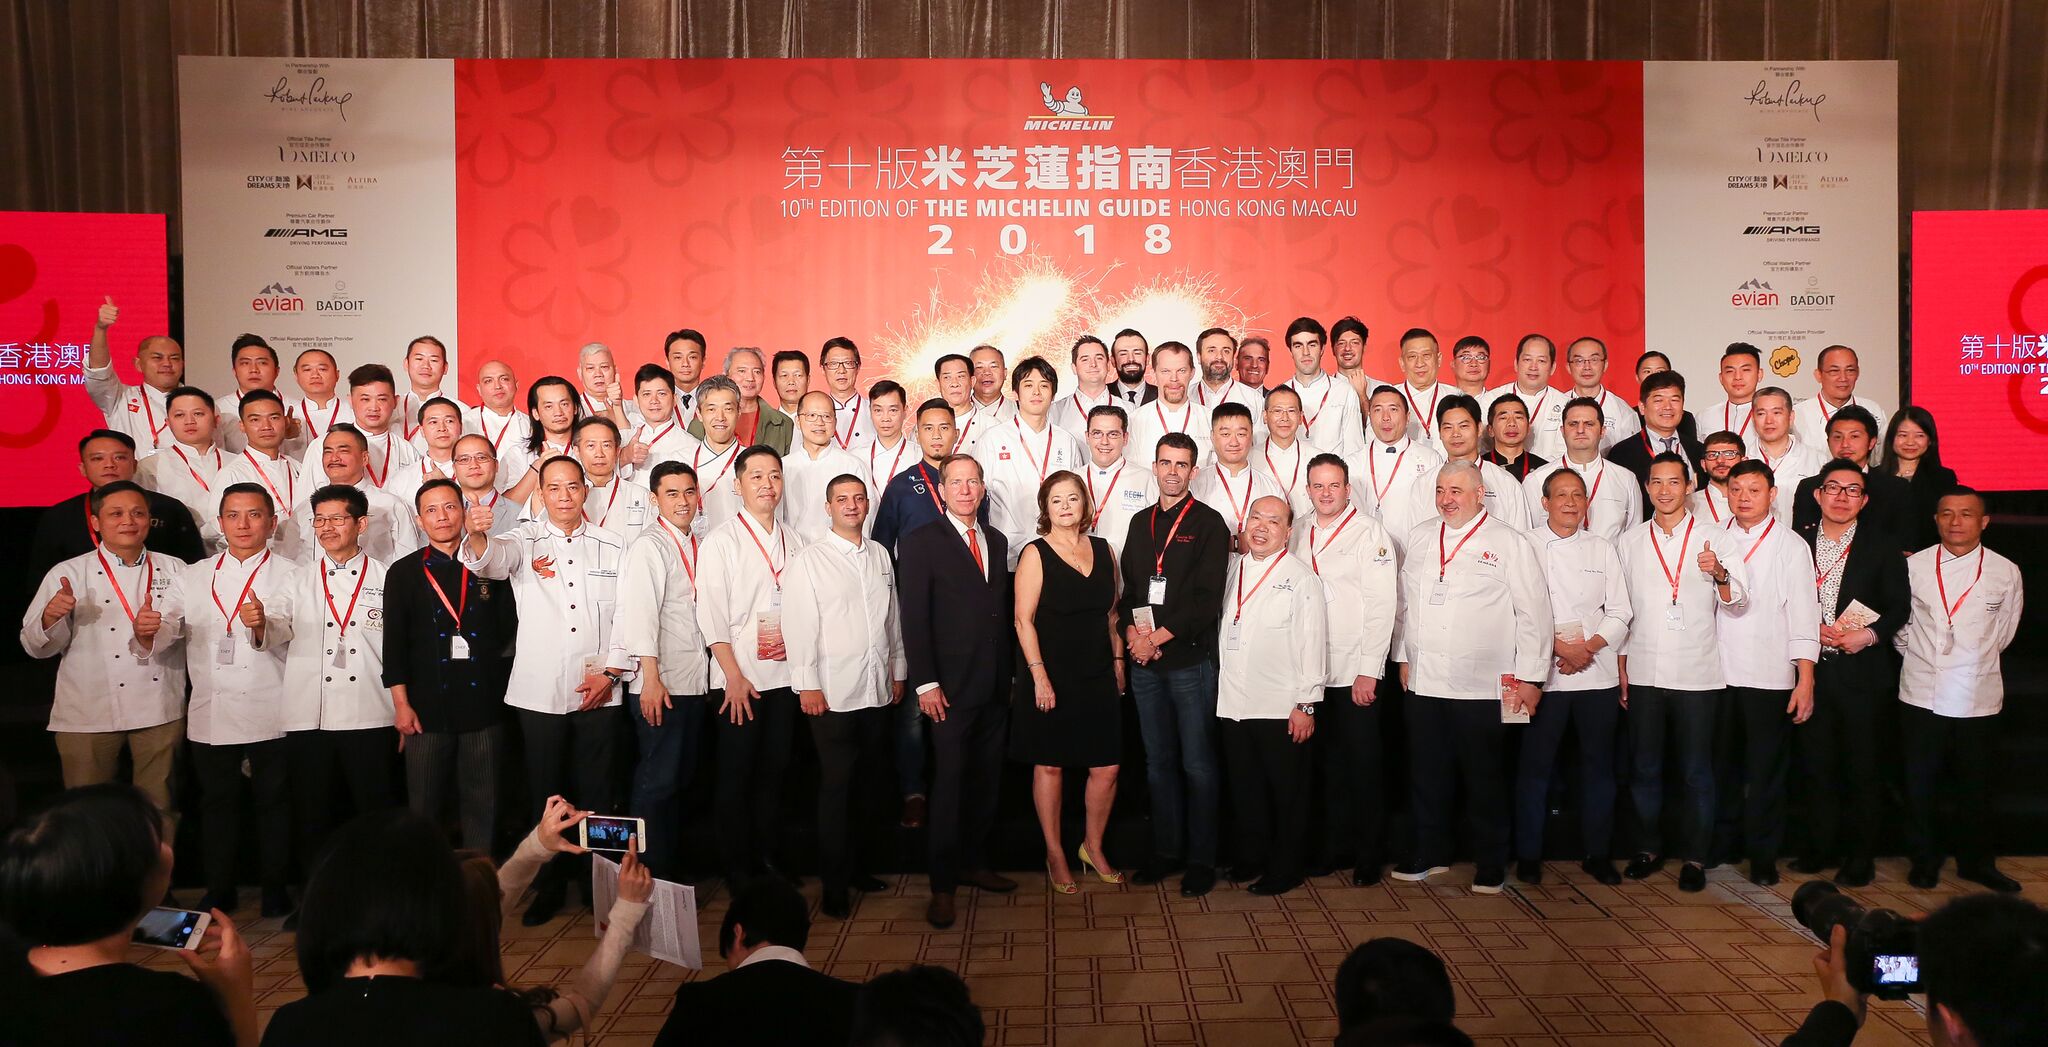 large group of chefs in white uniforms